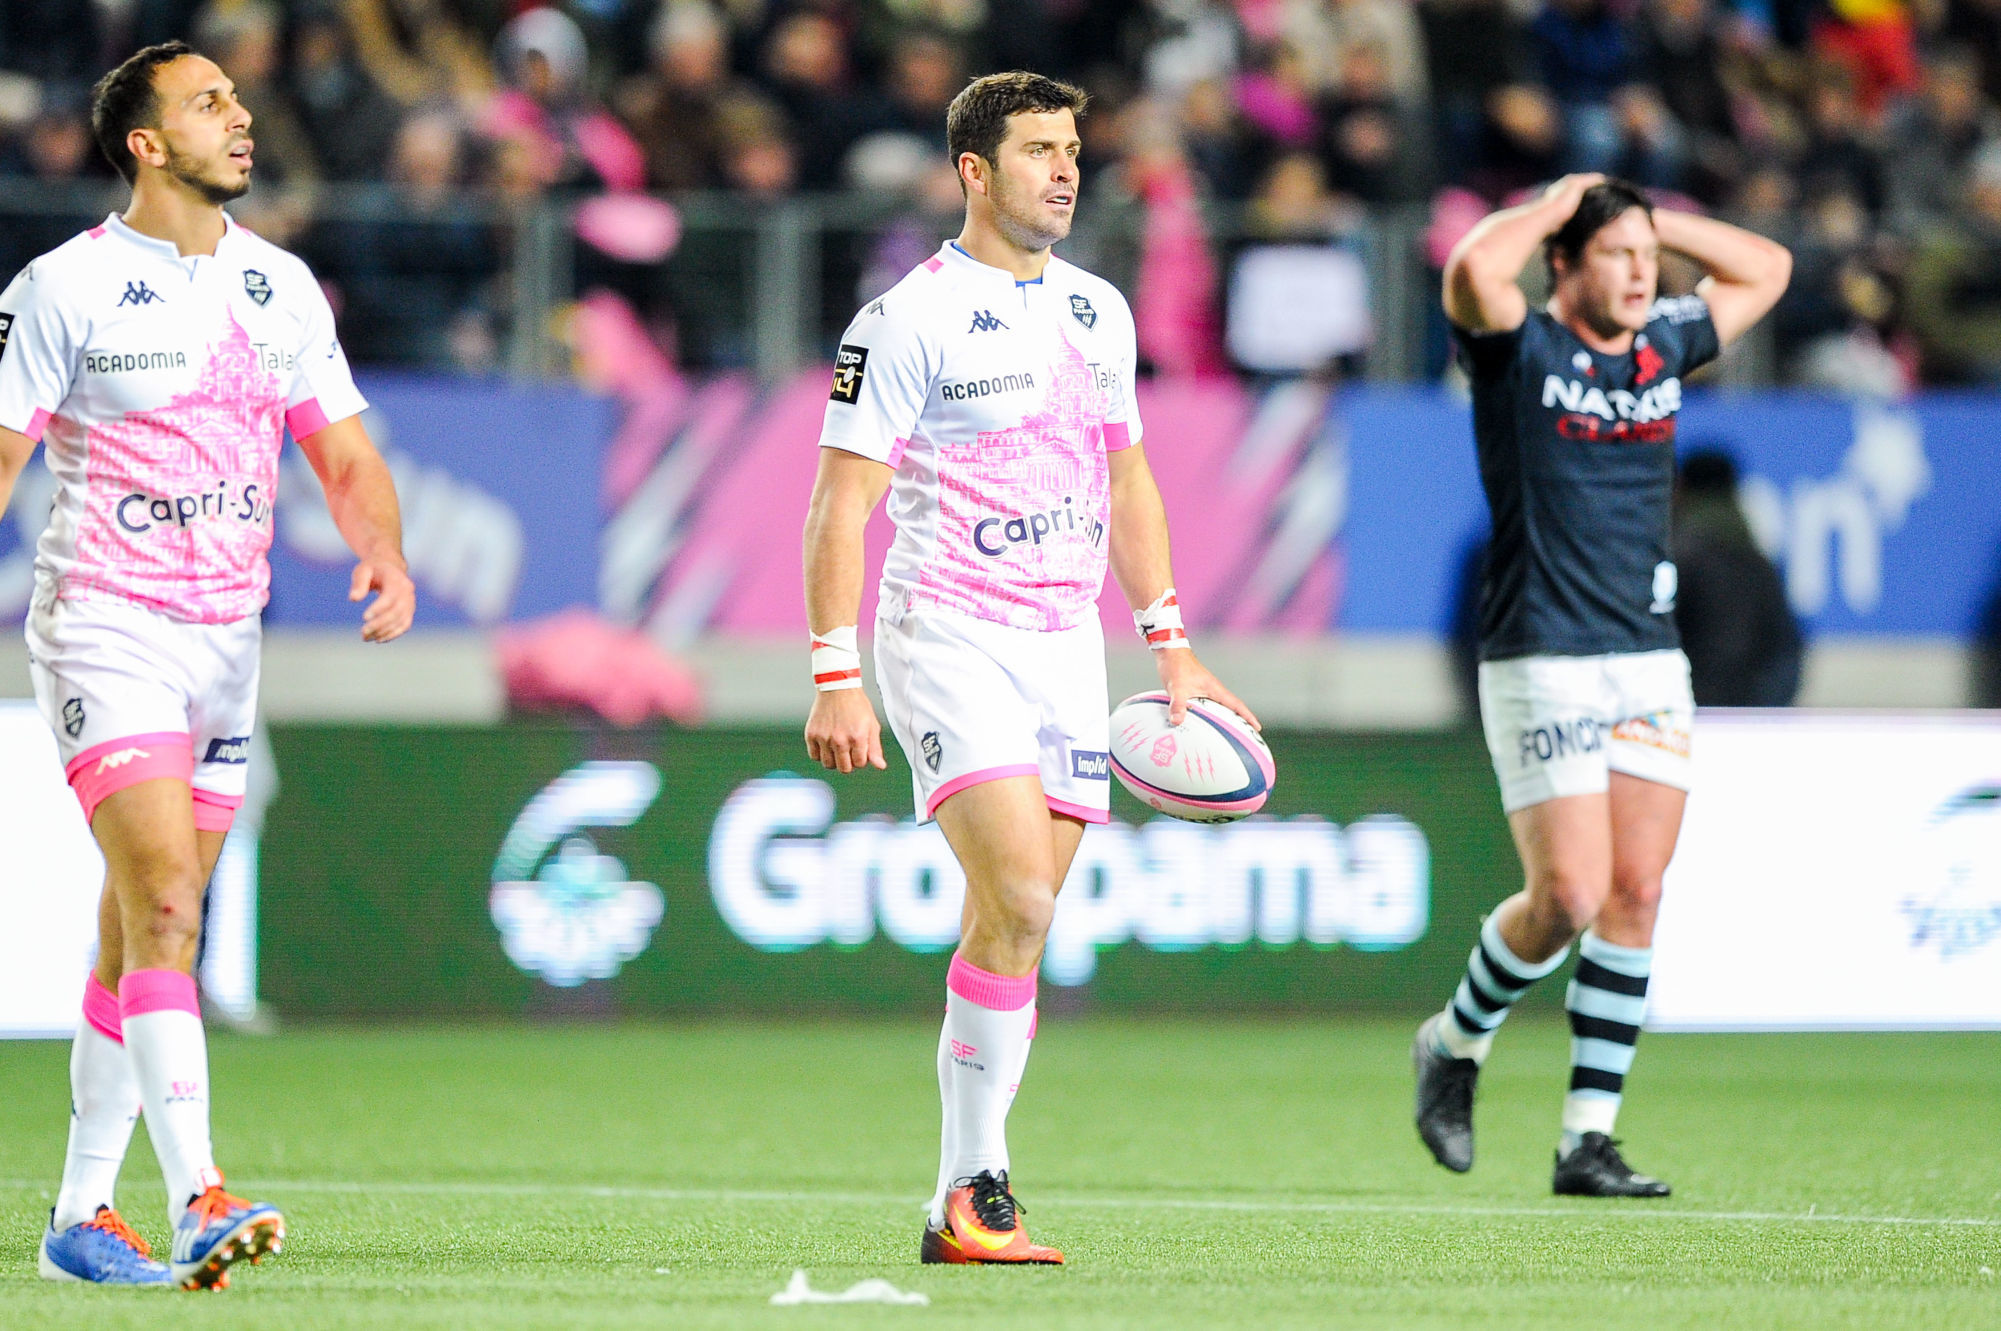 Morne STEYN of Stade Francais during the Top 14 match between Stade Francais and Racing 92 at Stade Jean Bouin on November 10, 2019 in Paris, France. (Photo by Sandra Ruhaut/Icon Sport) - Morne STEYN - Stade Jean Bouin - Paris (France)